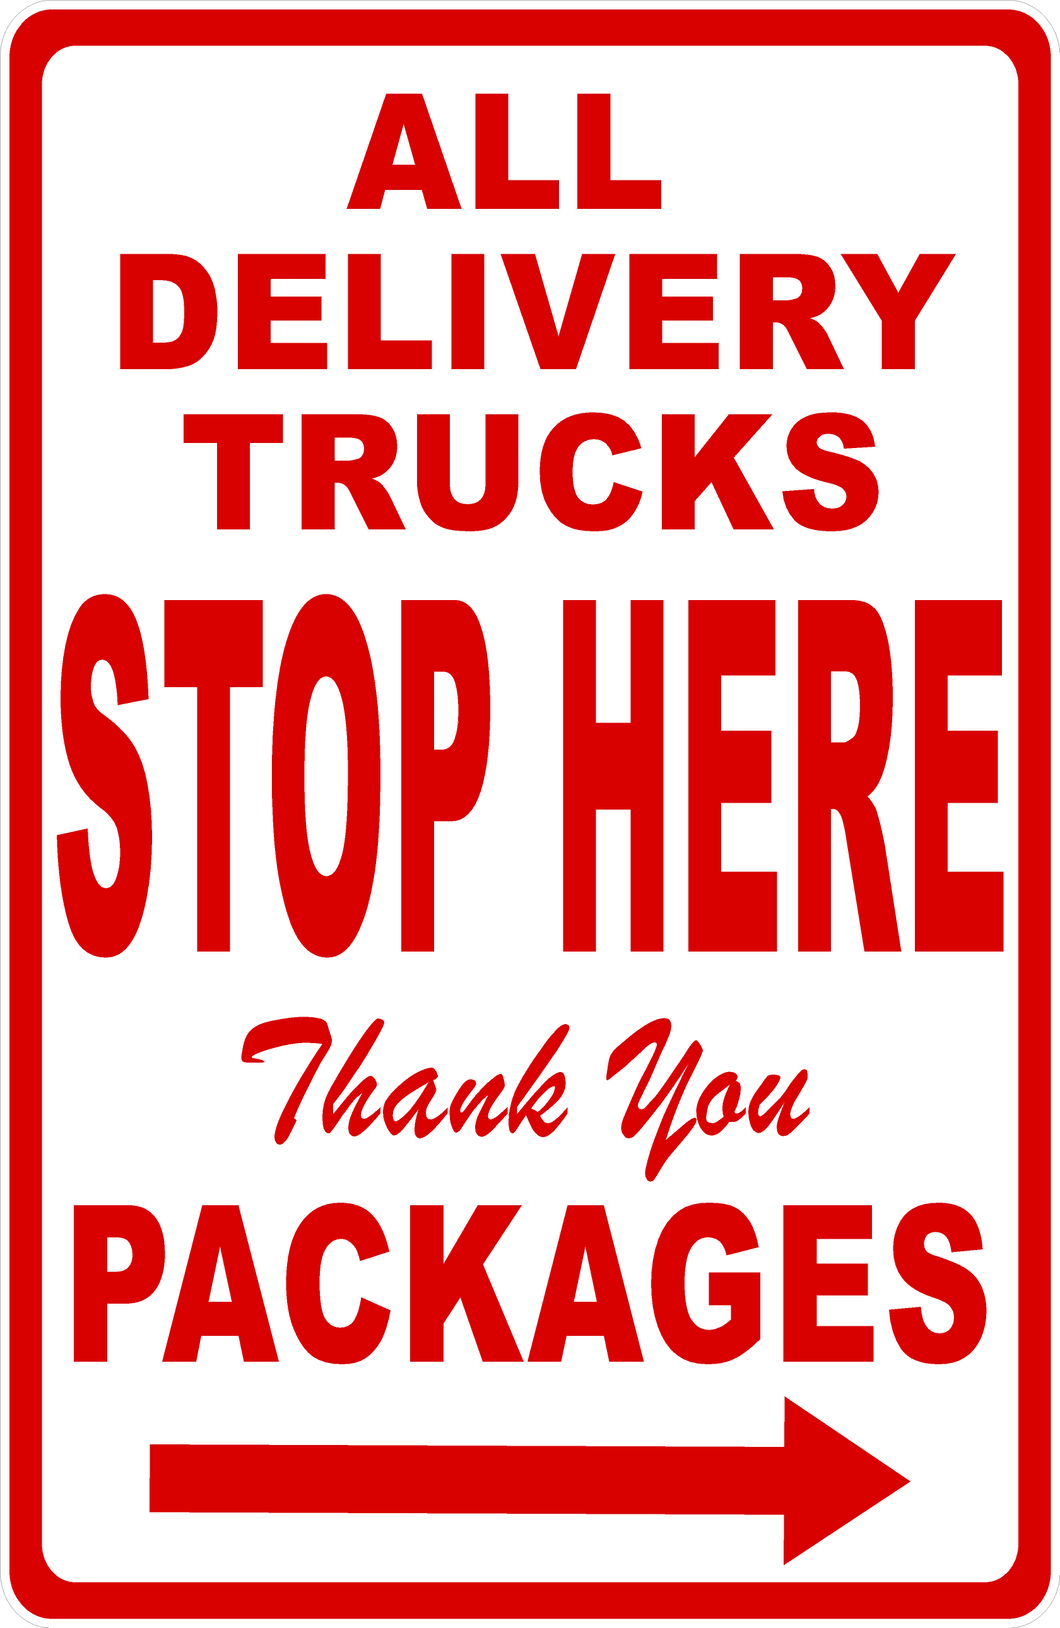 All Delivery Trucks Stop Here Sign